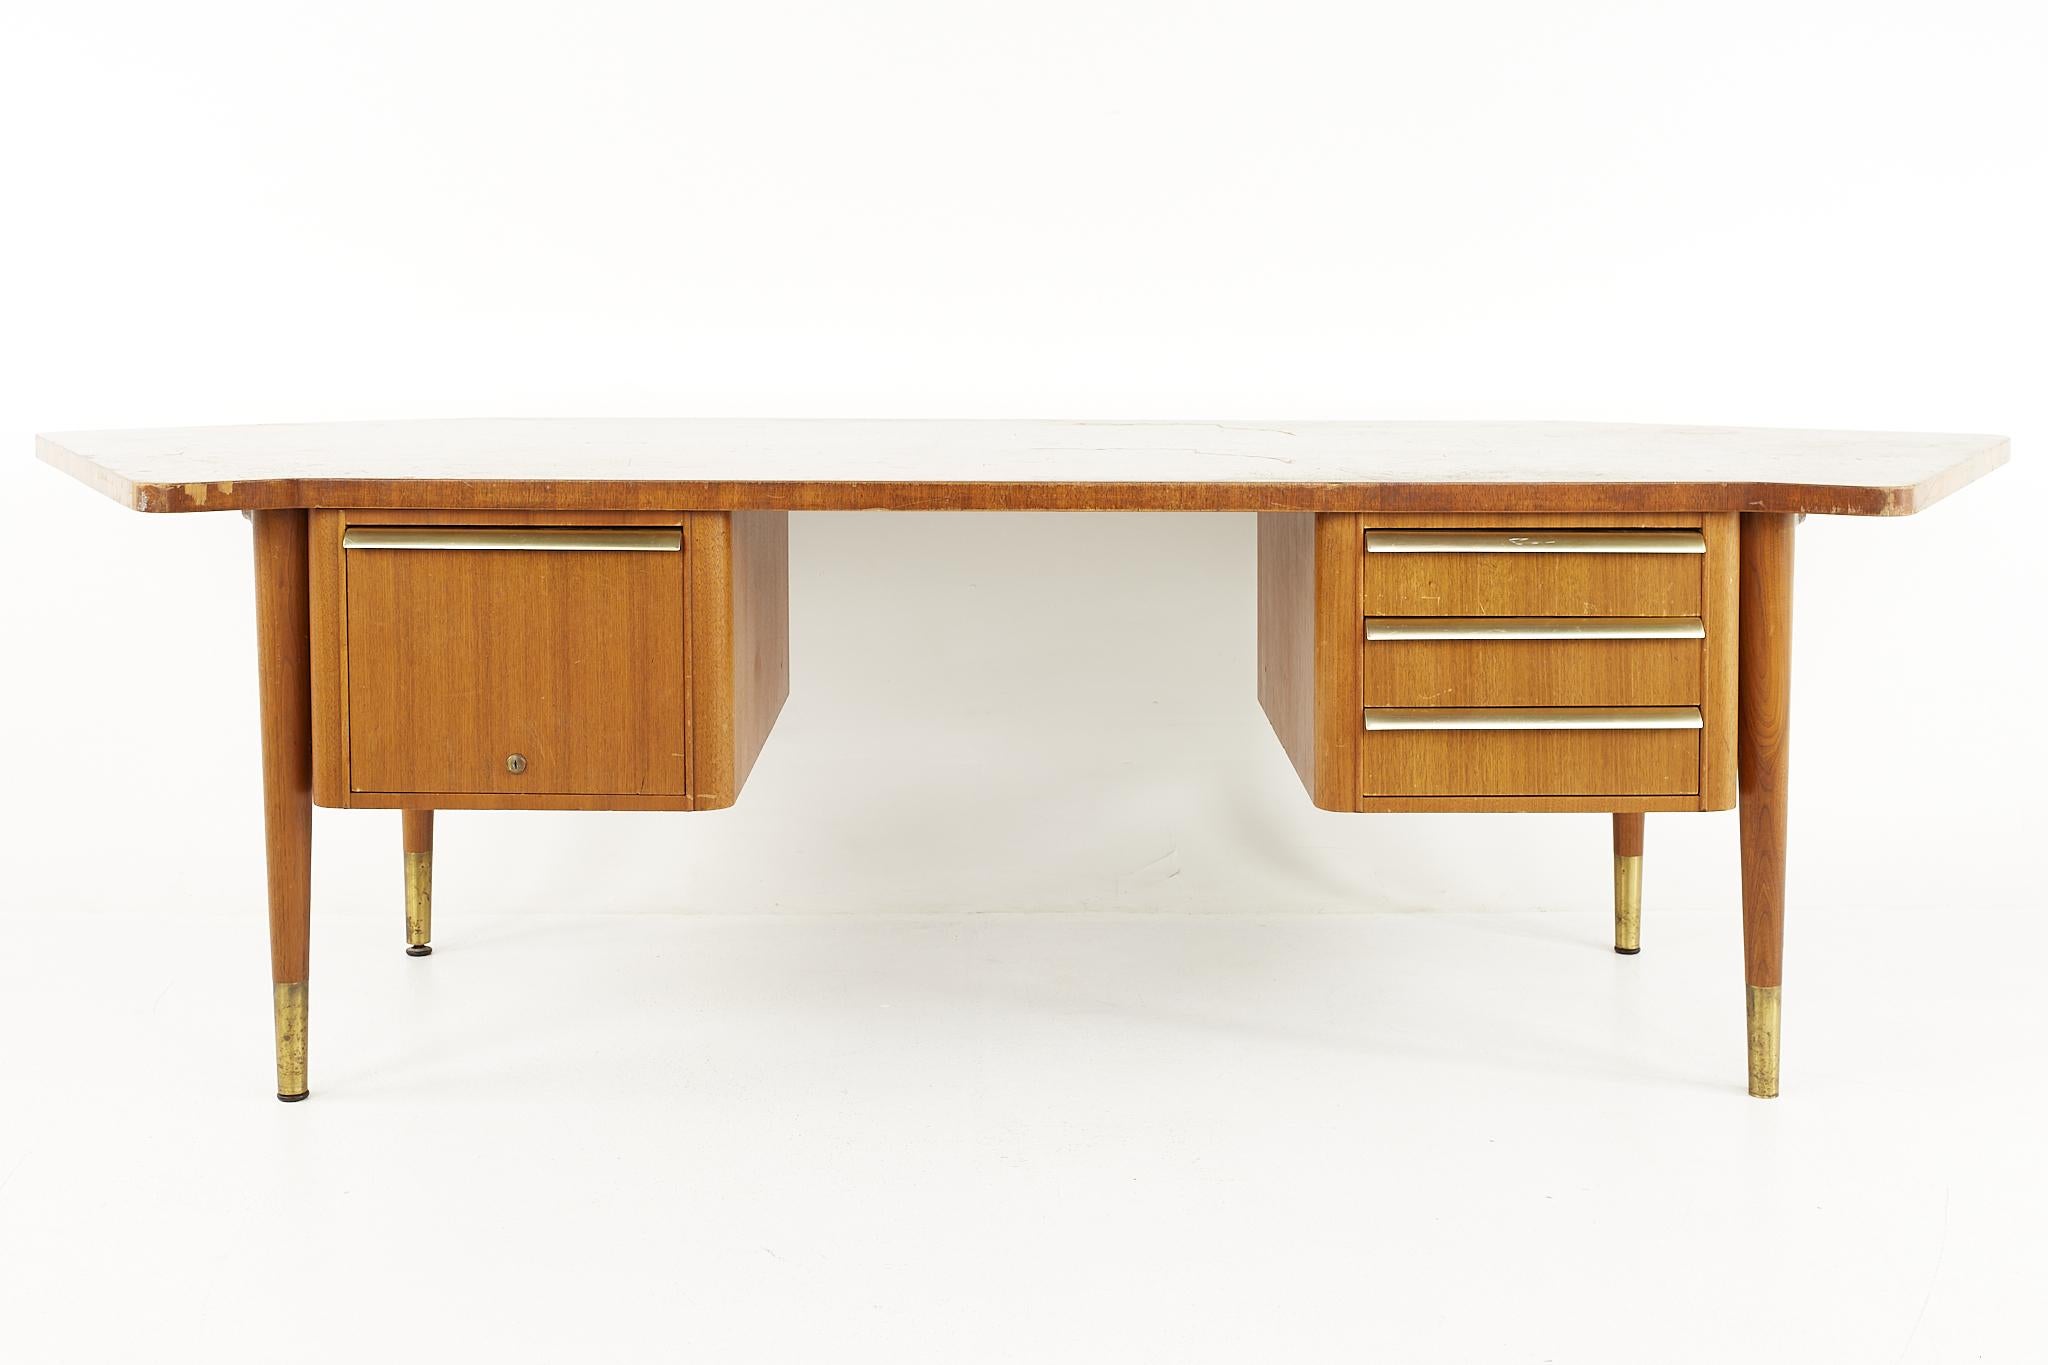 Stow Davis mid century boomerang walnut executive desk

The desk measures: 108 wide x 42.5 deep x 29.25 high, with a chair clearance of 27.75 inches high

All pieces of furniture can be had in what we call restored vintage condition. That means